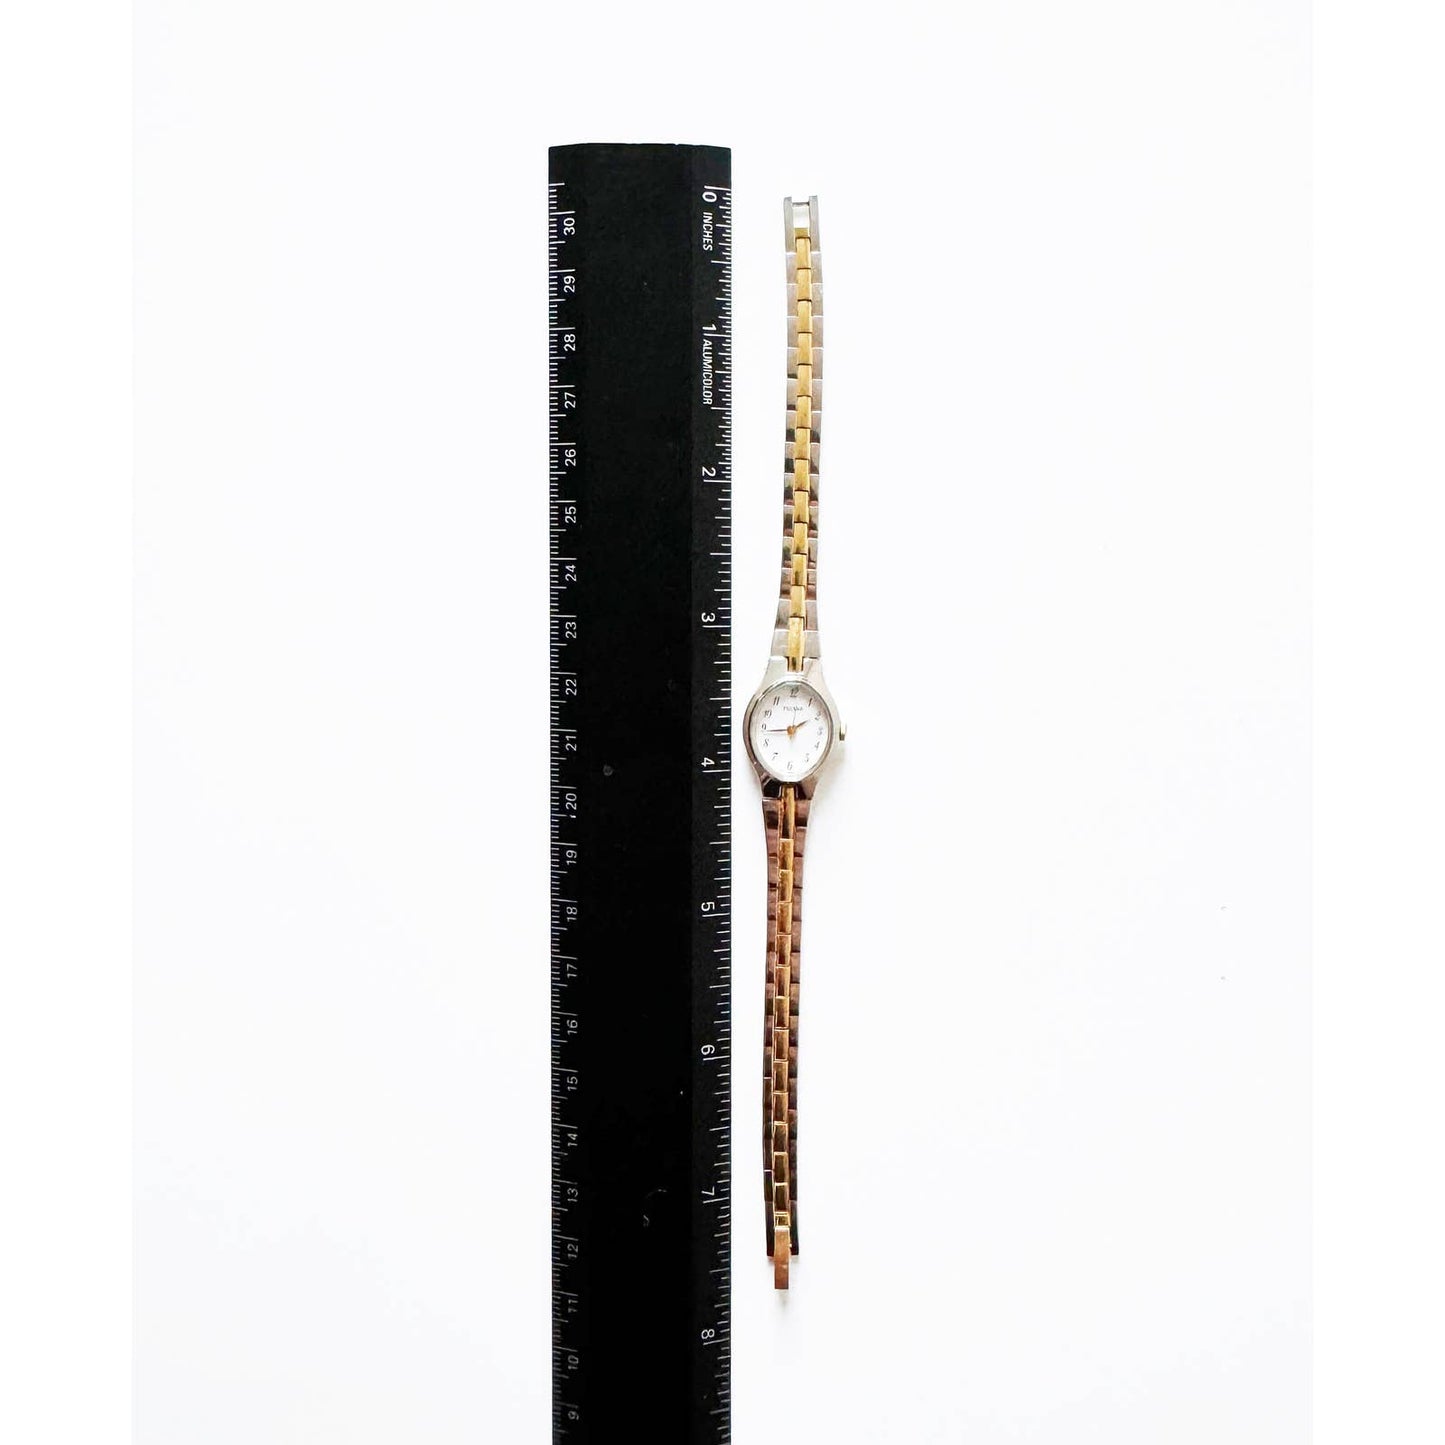 Vintage Small Two Tone Watch with Oval Face | Pulsar